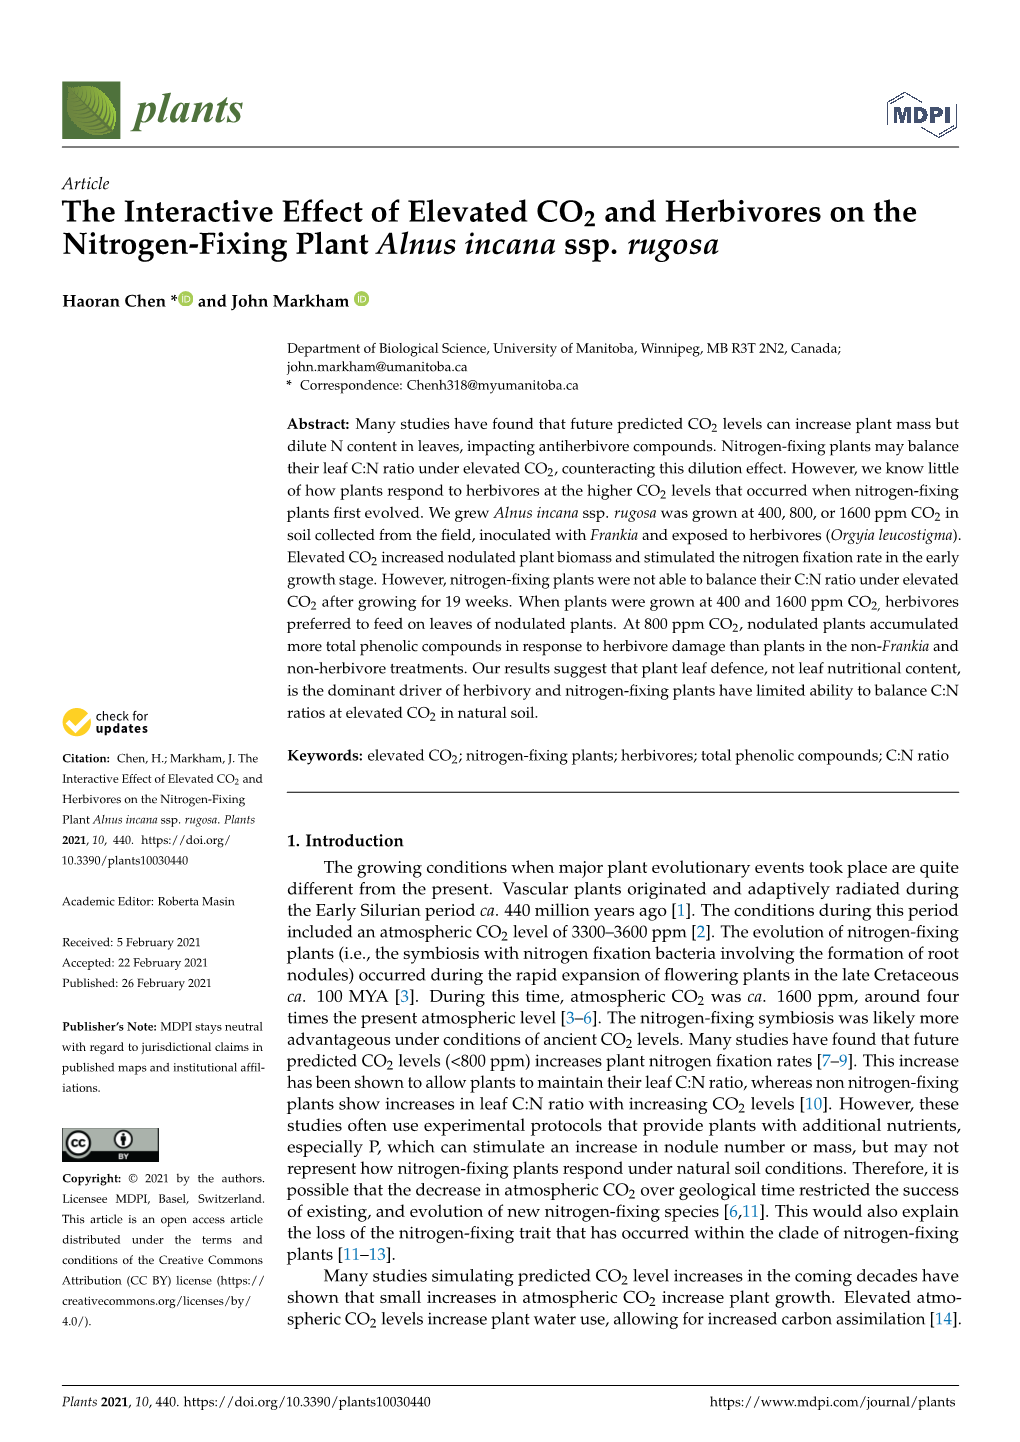 The Interactive Effect of Elevated CO2 and Herbivores on the Nitrogen-Fixing Plant Alnus Incana Ssp